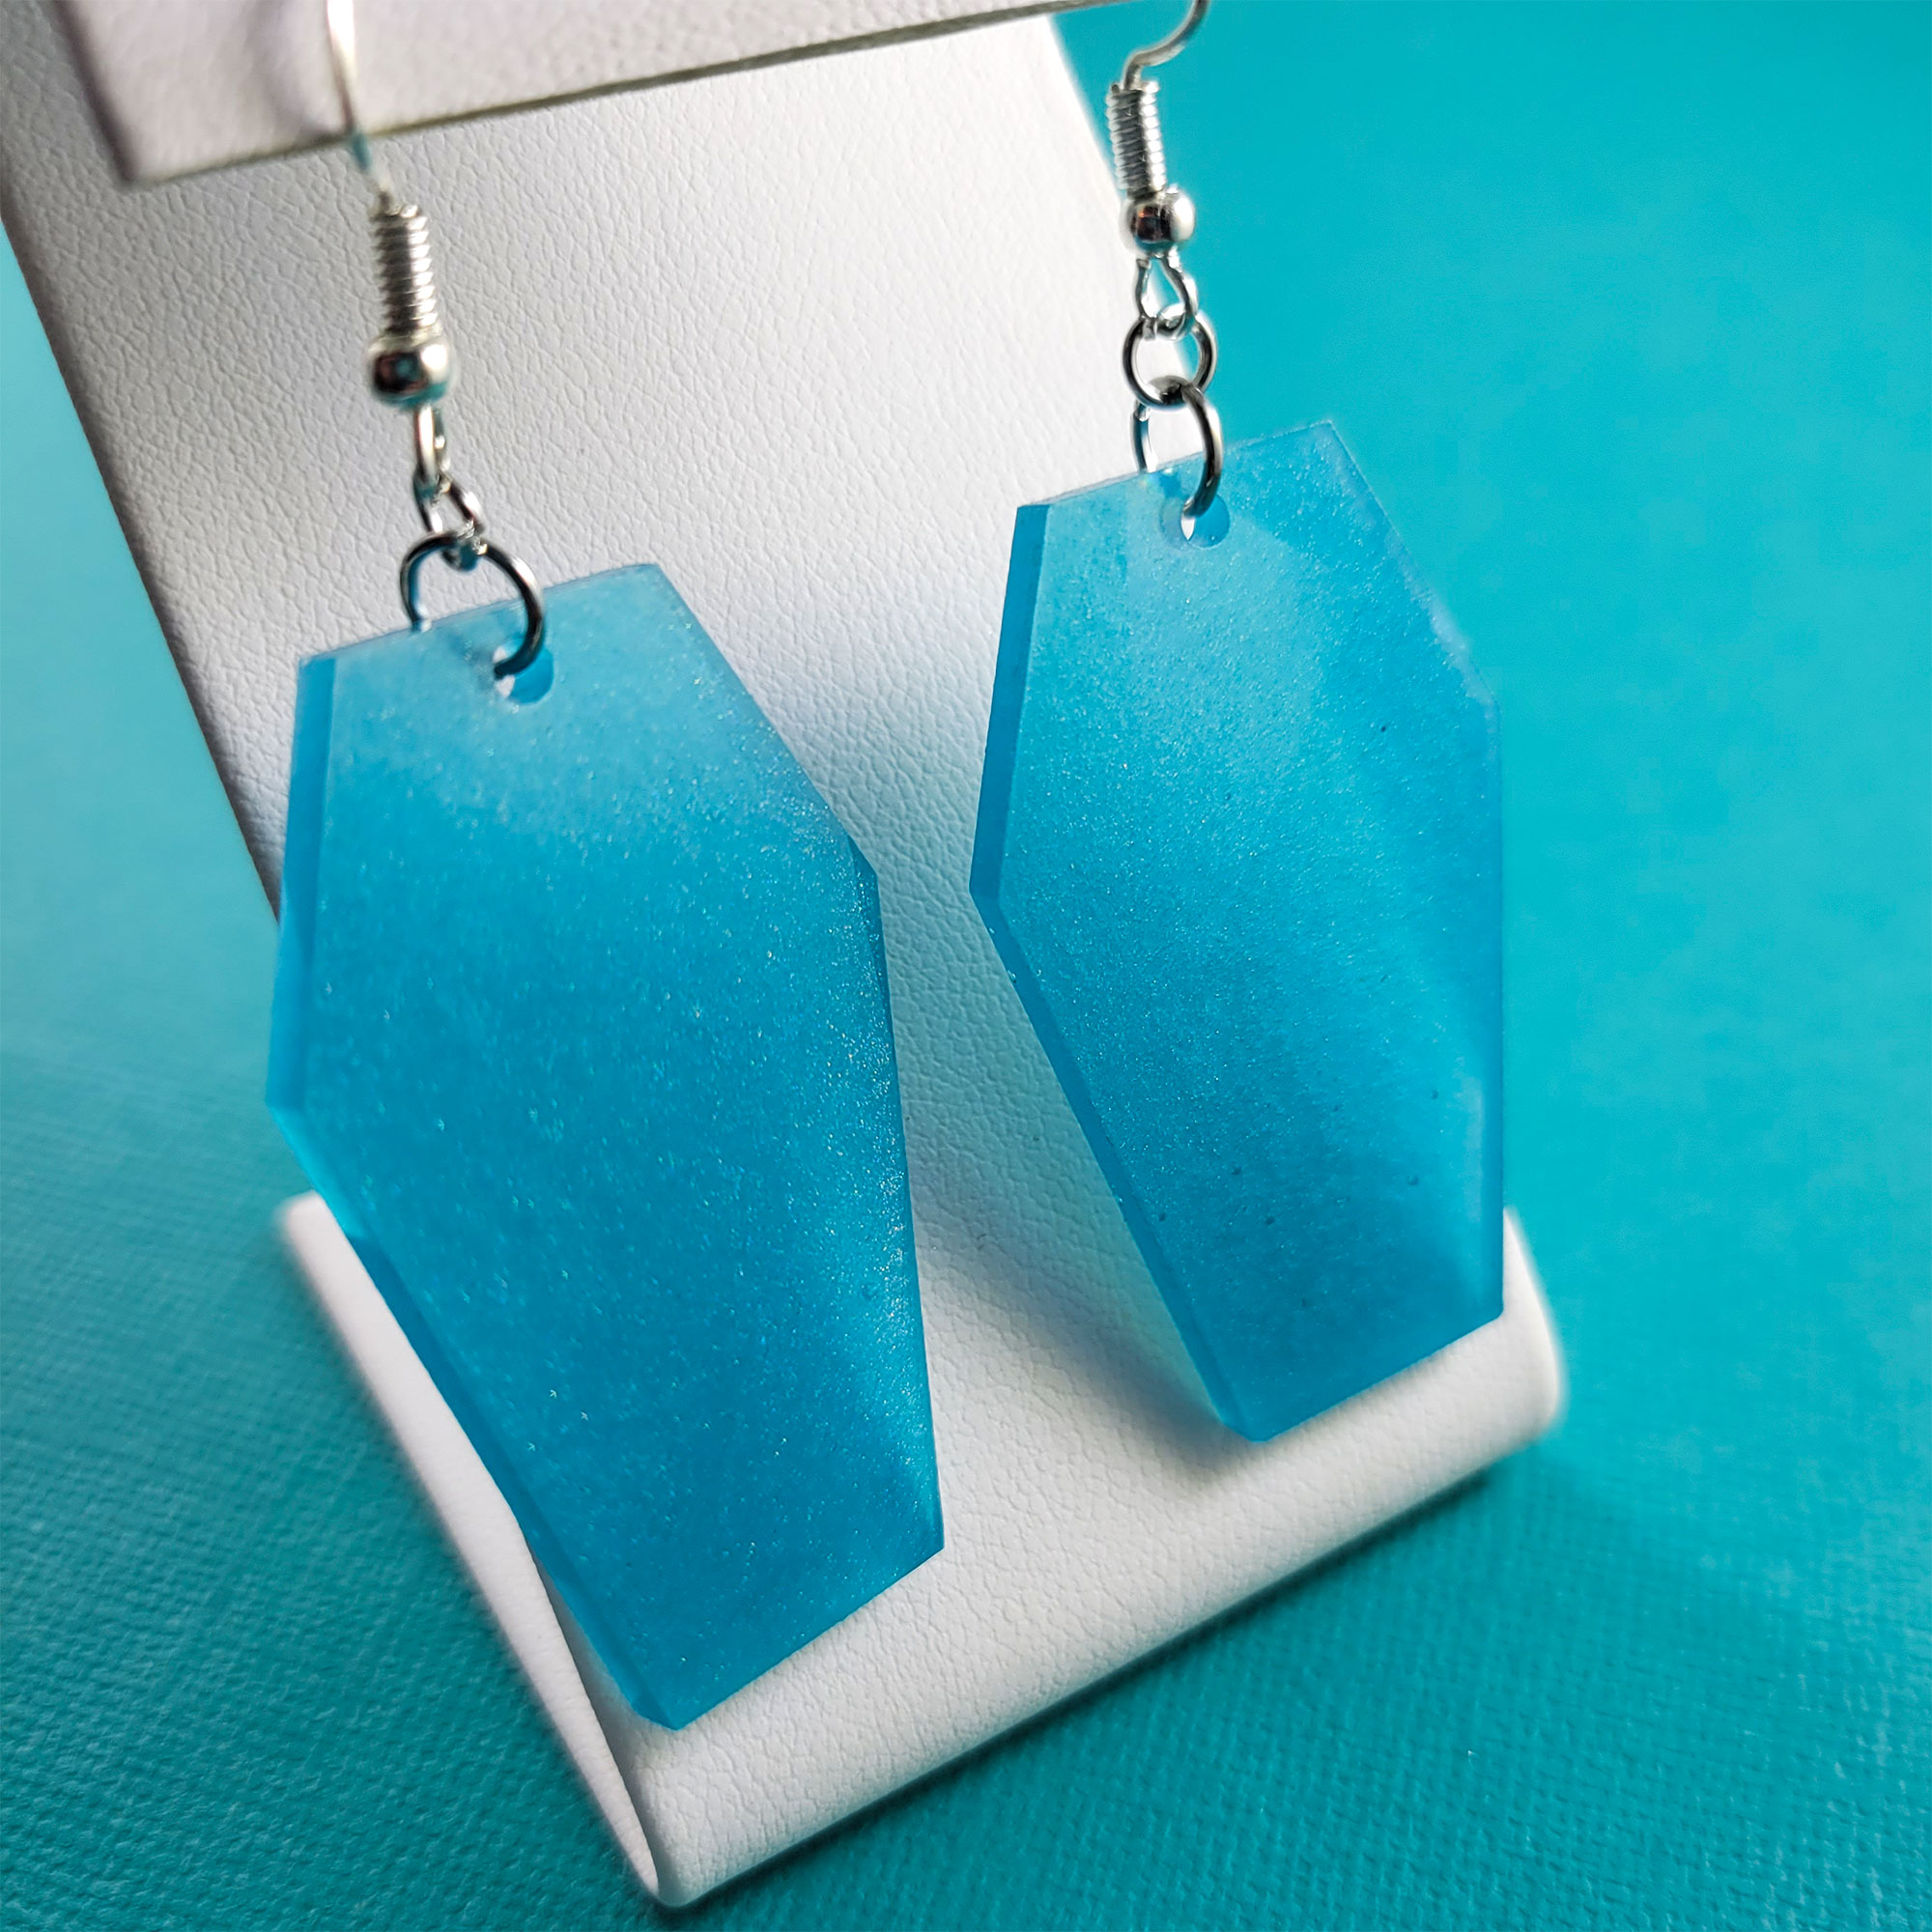 Teal Holographic Coffin Earrings by Wilde Designs